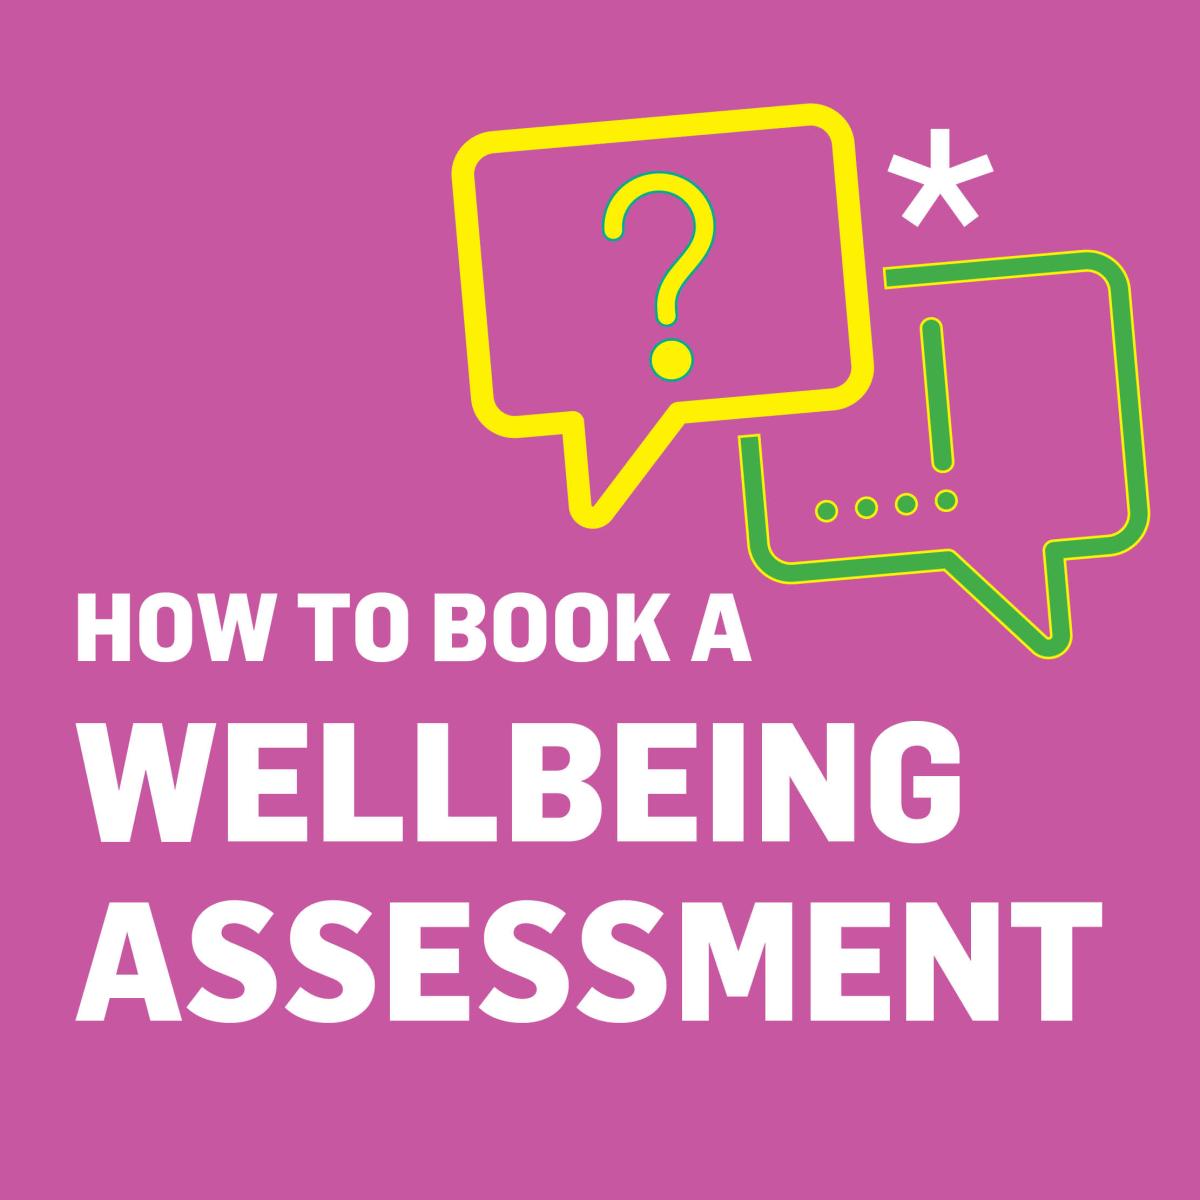 How to book a wellbeing assessment